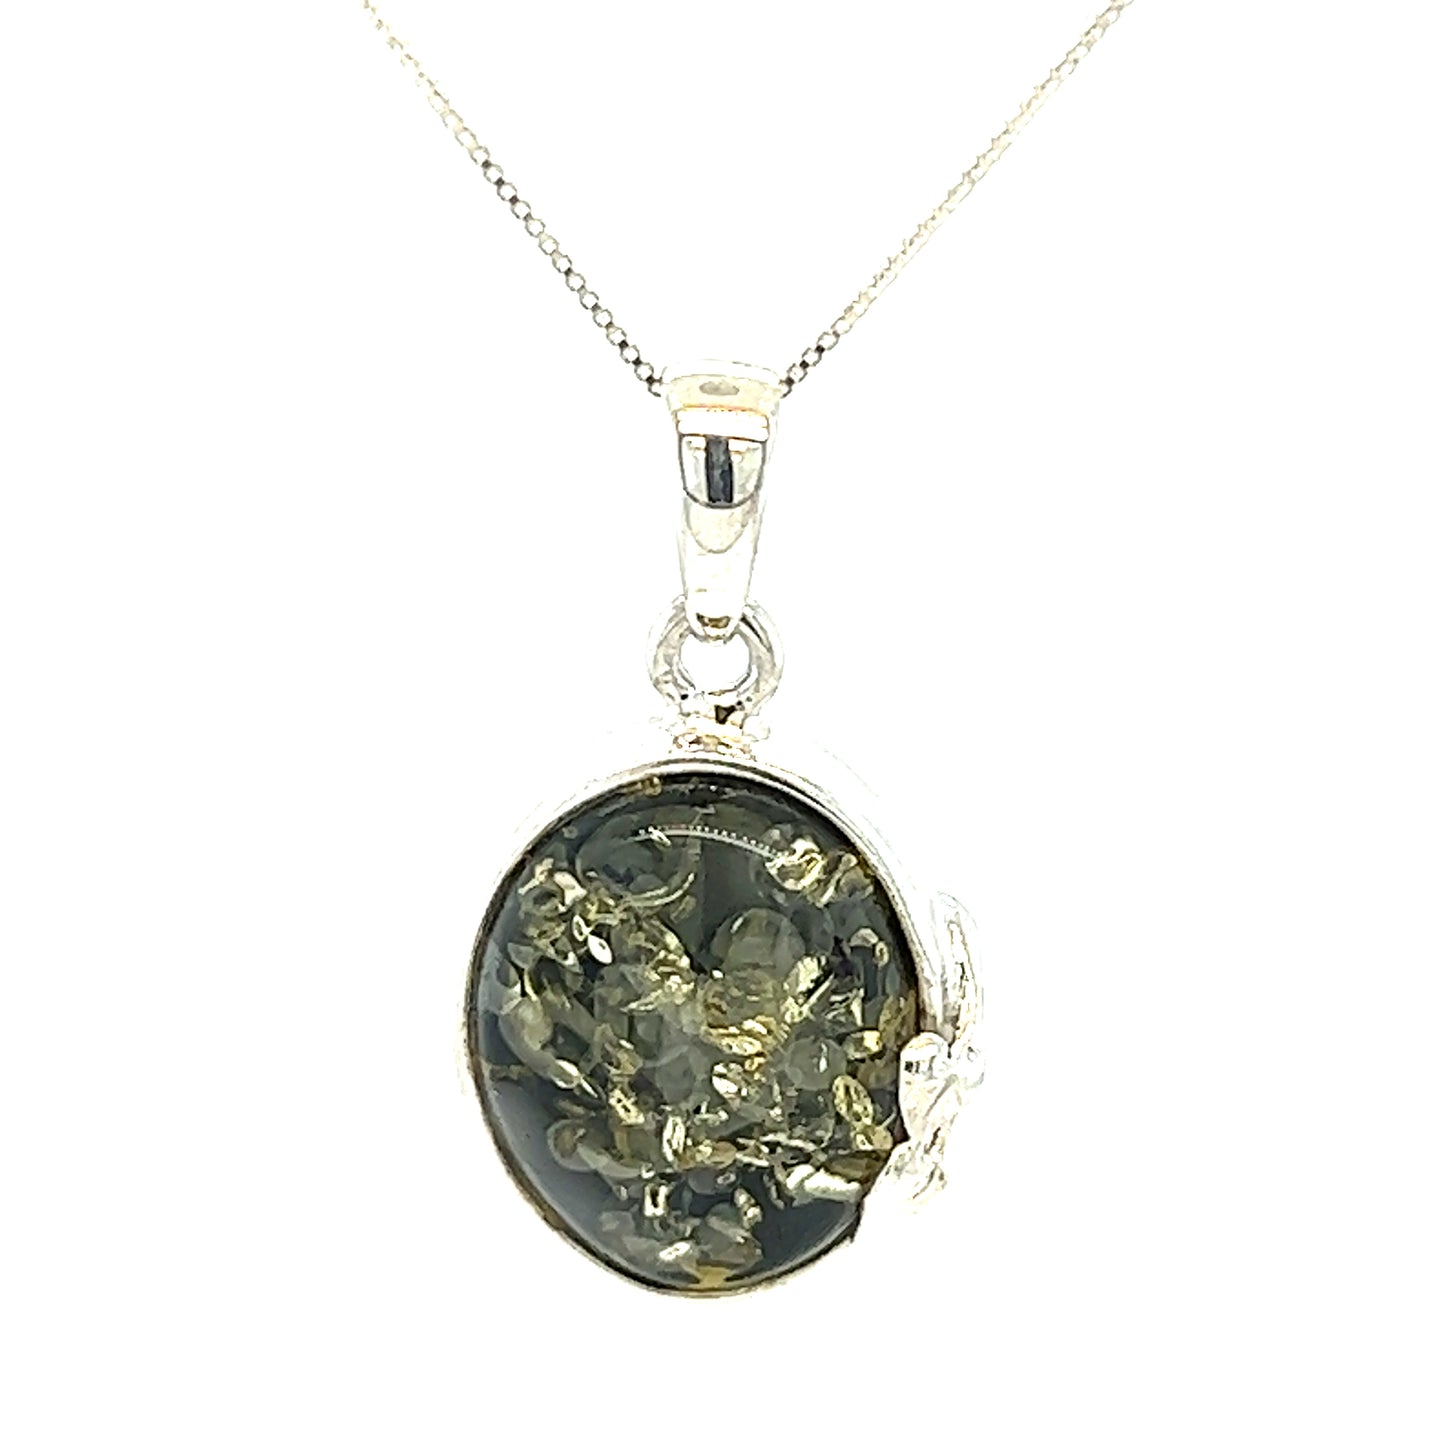 This nature-inspired pendant, the Green Amber Oval Pendant with Delicate Leaf from Super Silver, features a silver setting with a mesmerizing black and green stone, known for its healing properties.